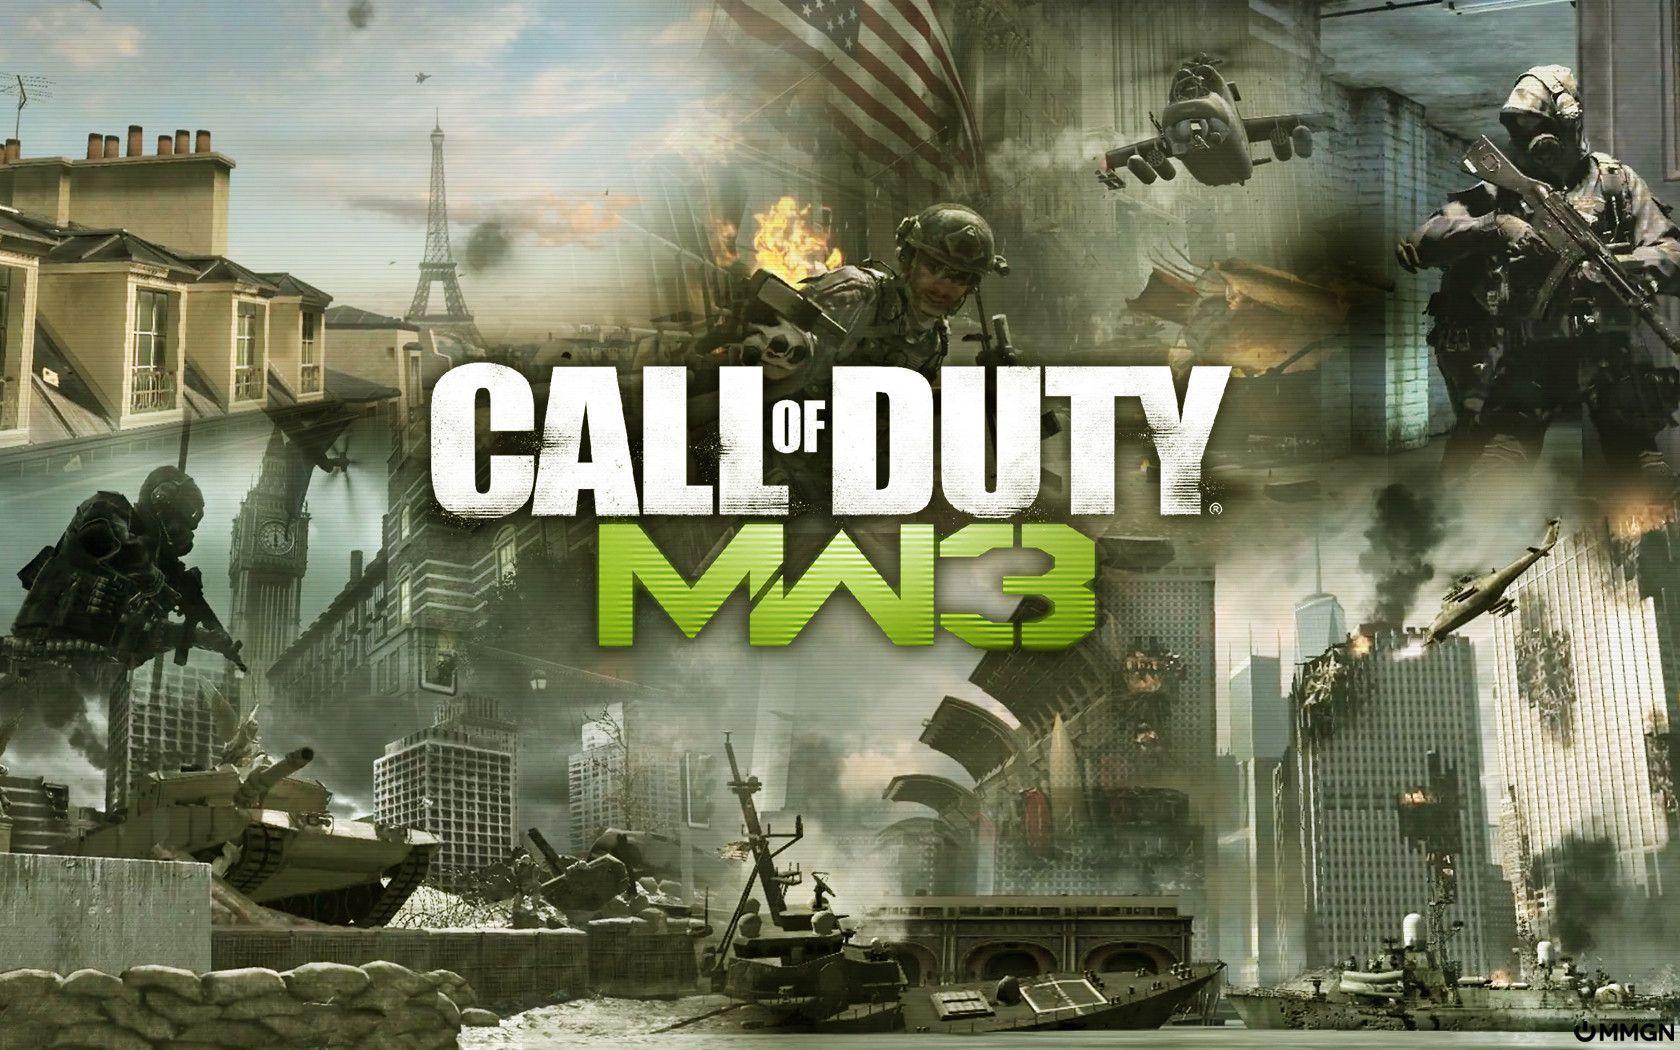 MW3 Wallpaper HD Background Picture Image Photo 66543 Label